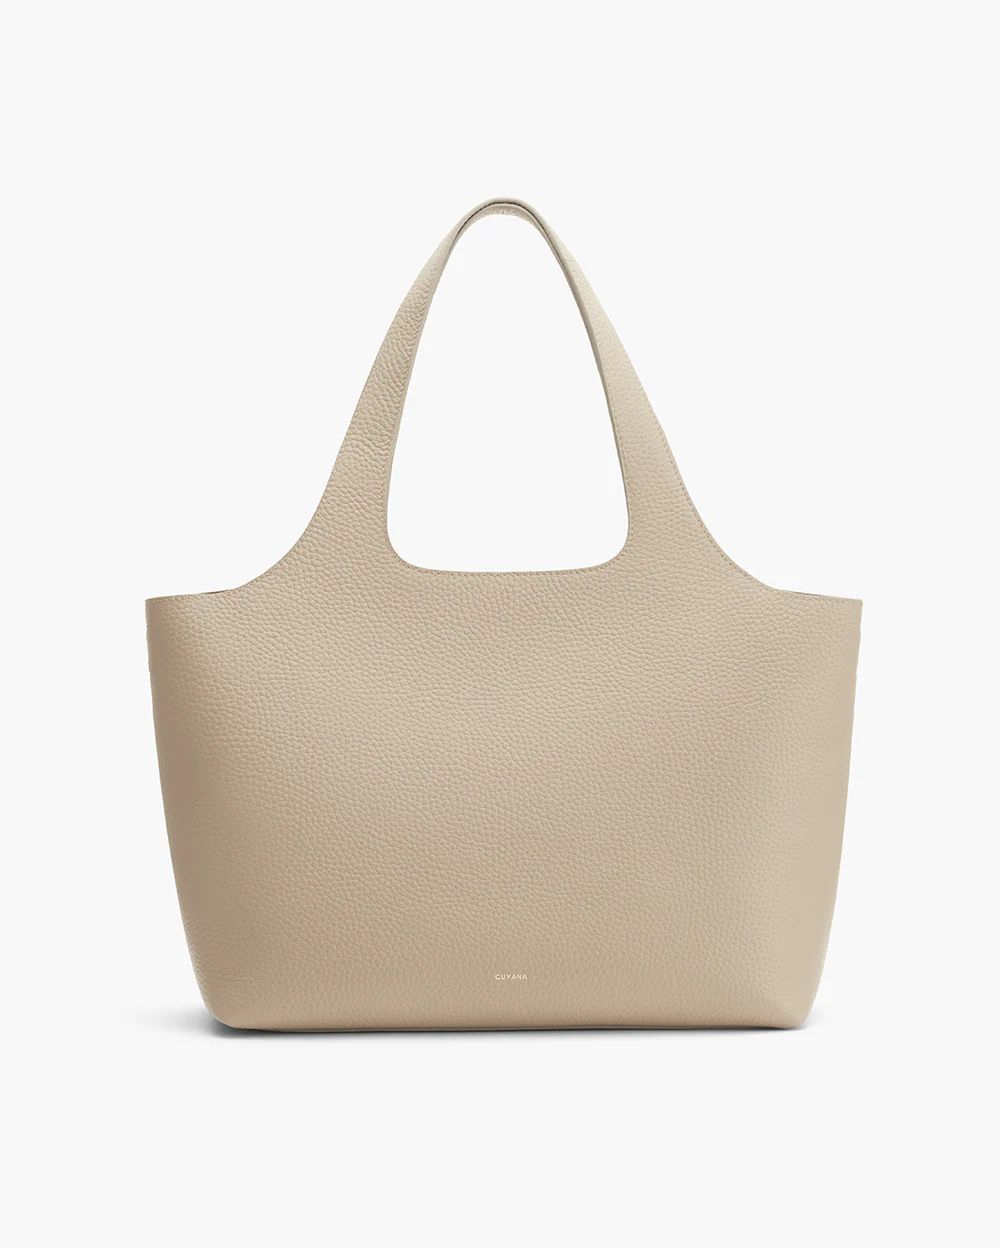 System Tote 16-inch | Cuyana